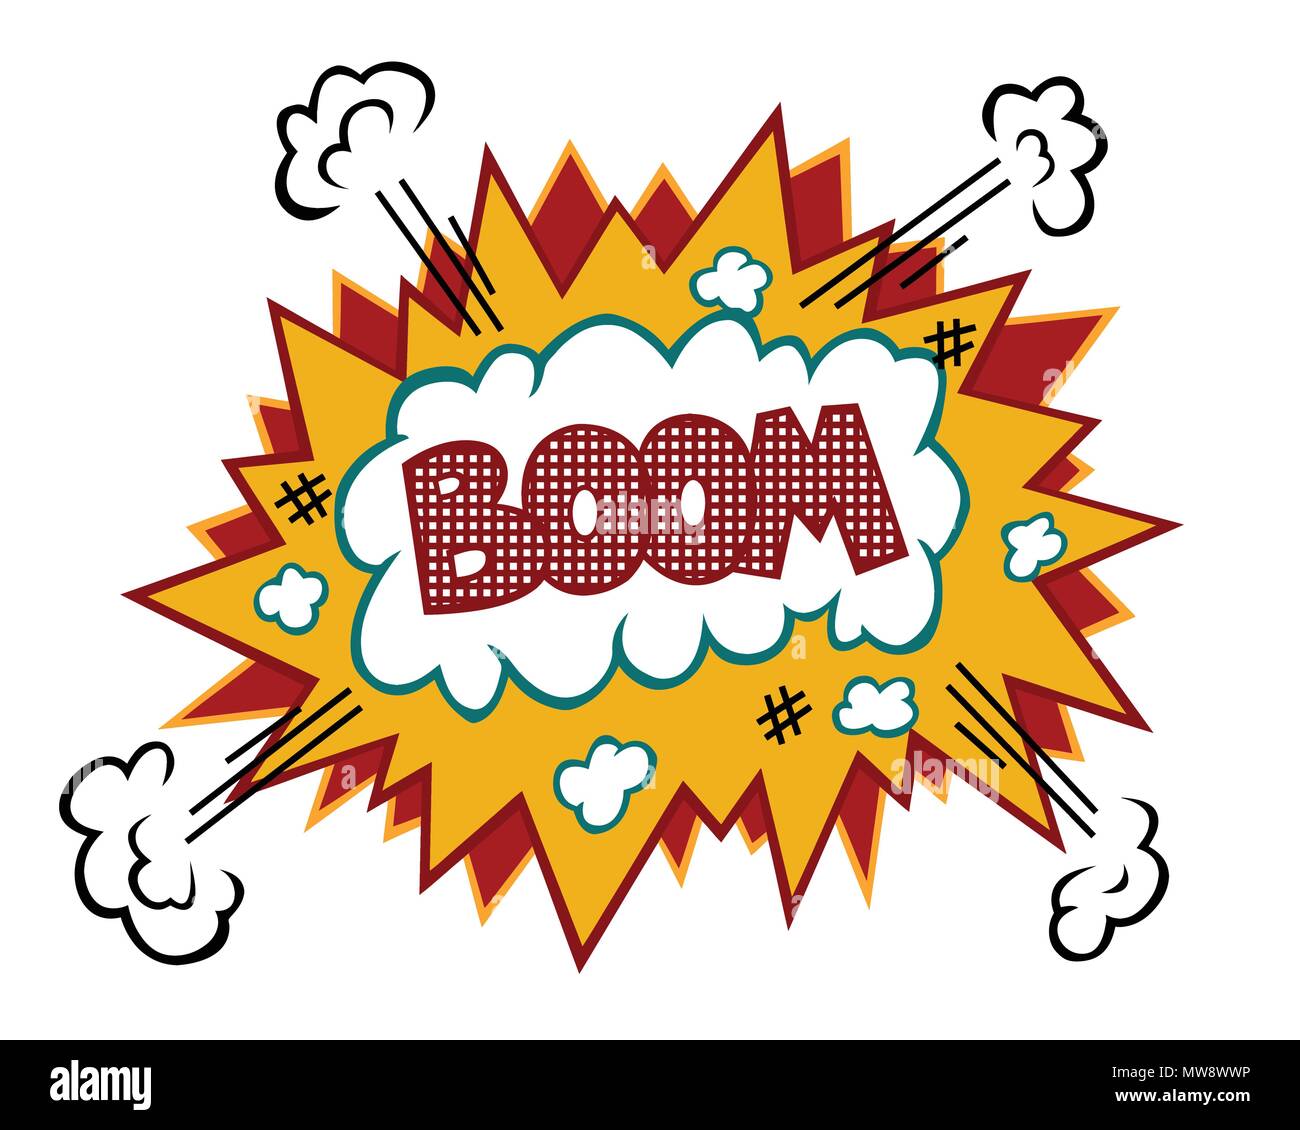 Boom comic text illustration isolated on white Stock Vector